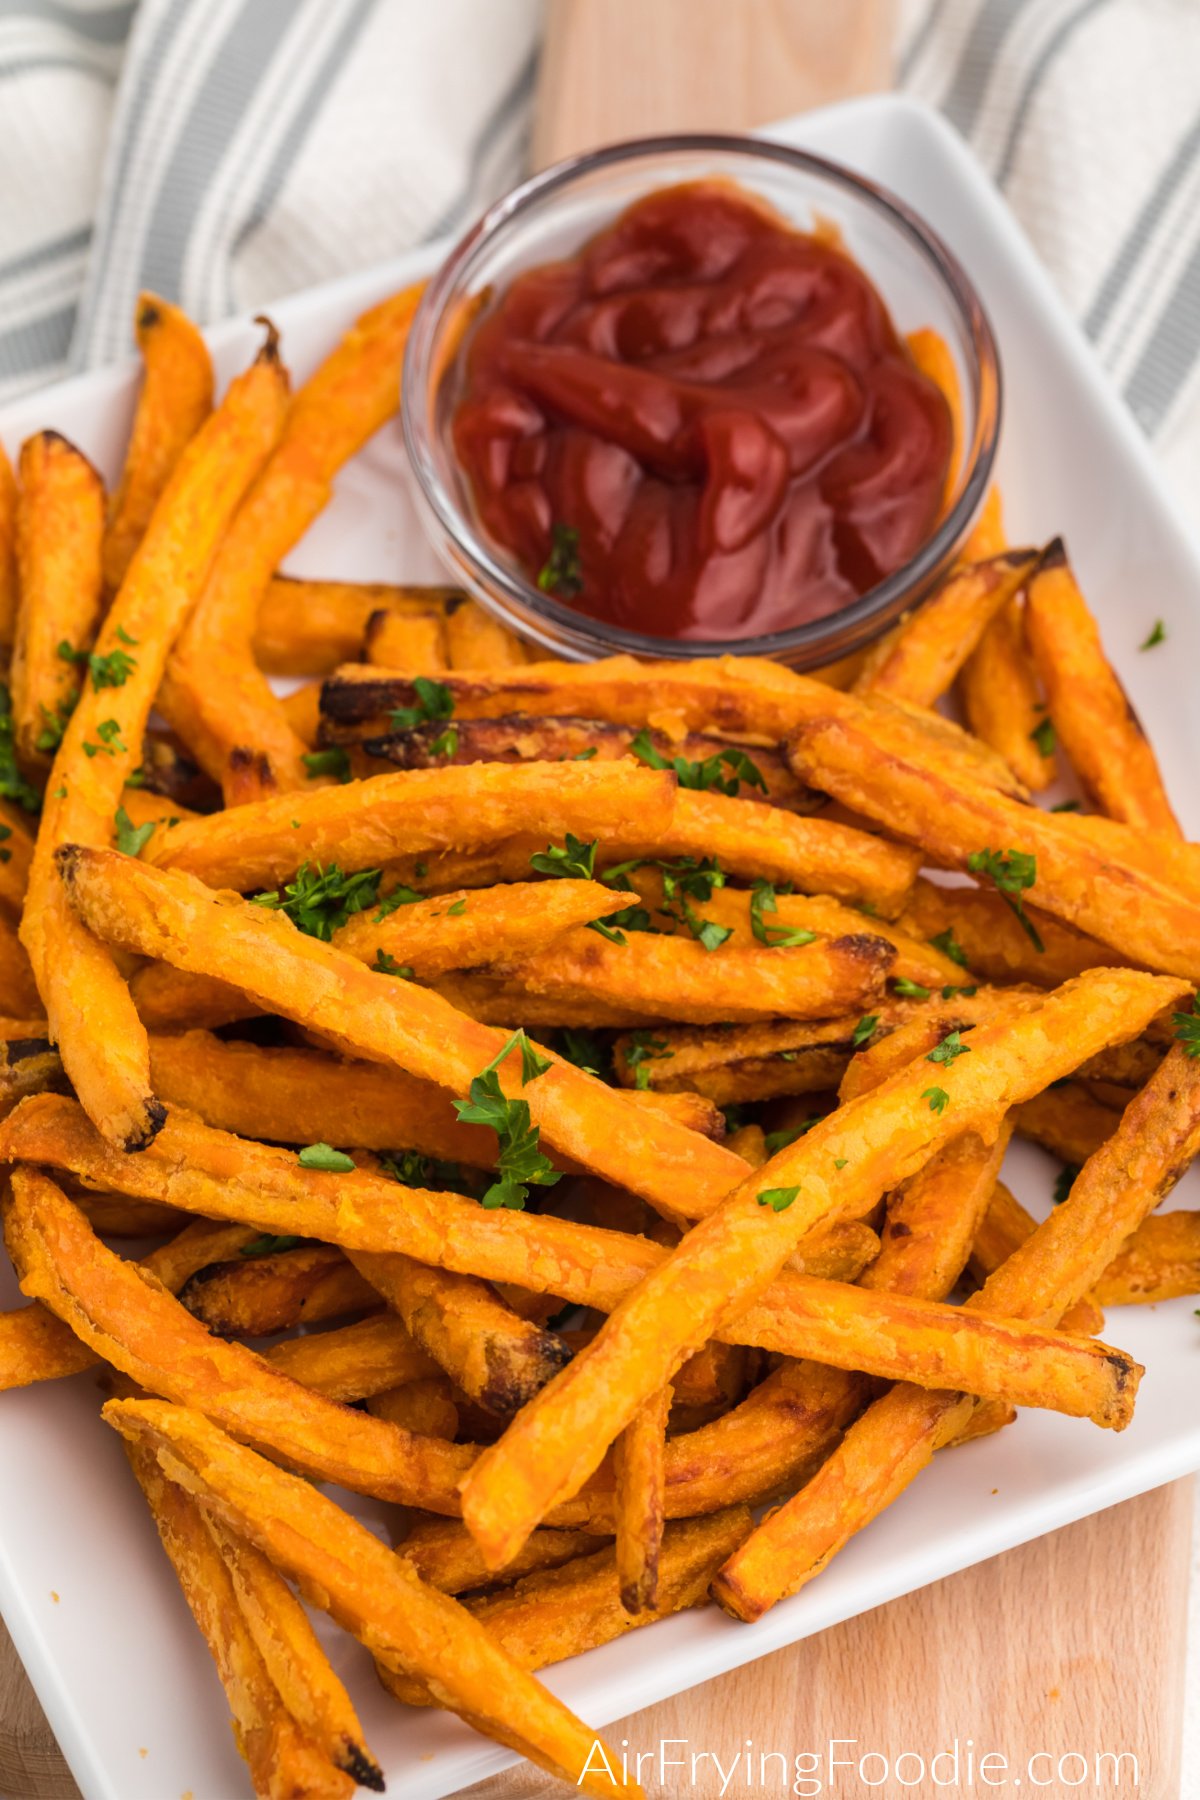 Plate full of cooked sweet potato fries with a side of ketchup.